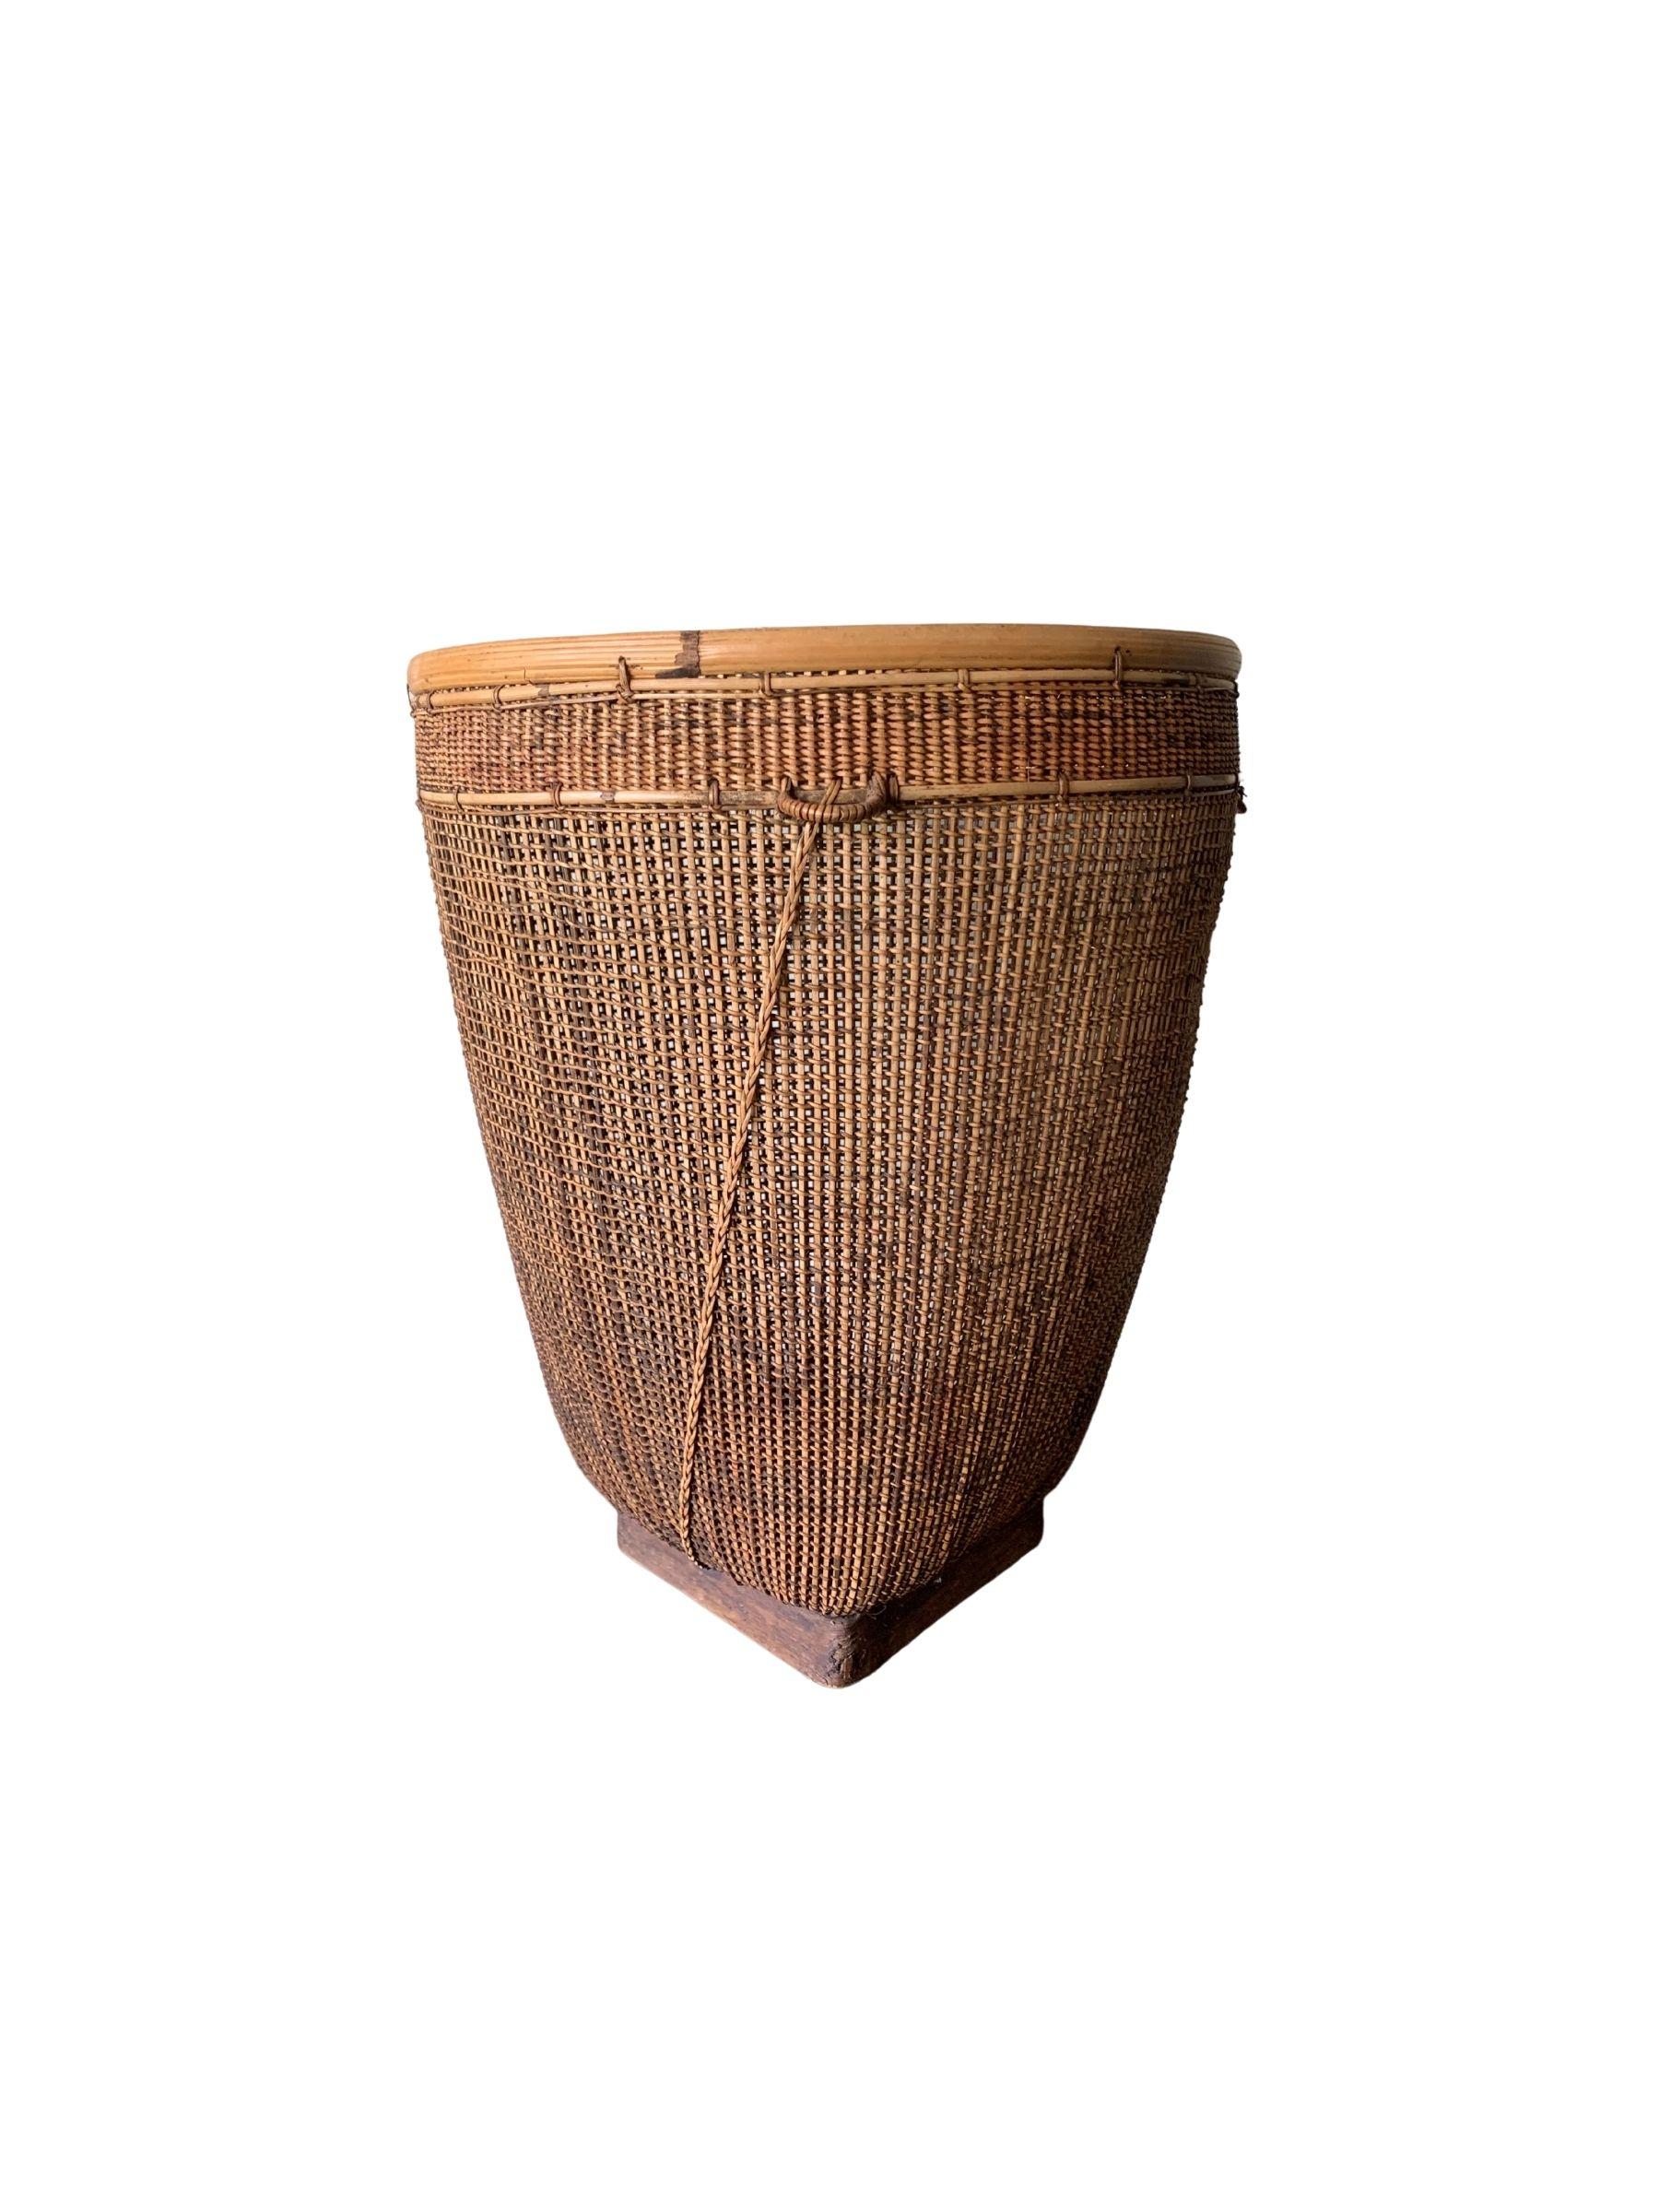 Other Bamboo & Rattan Basket from Dayak Tribe, Hand-Crafted Borneo, Indonesia, c. 1950 For Sale